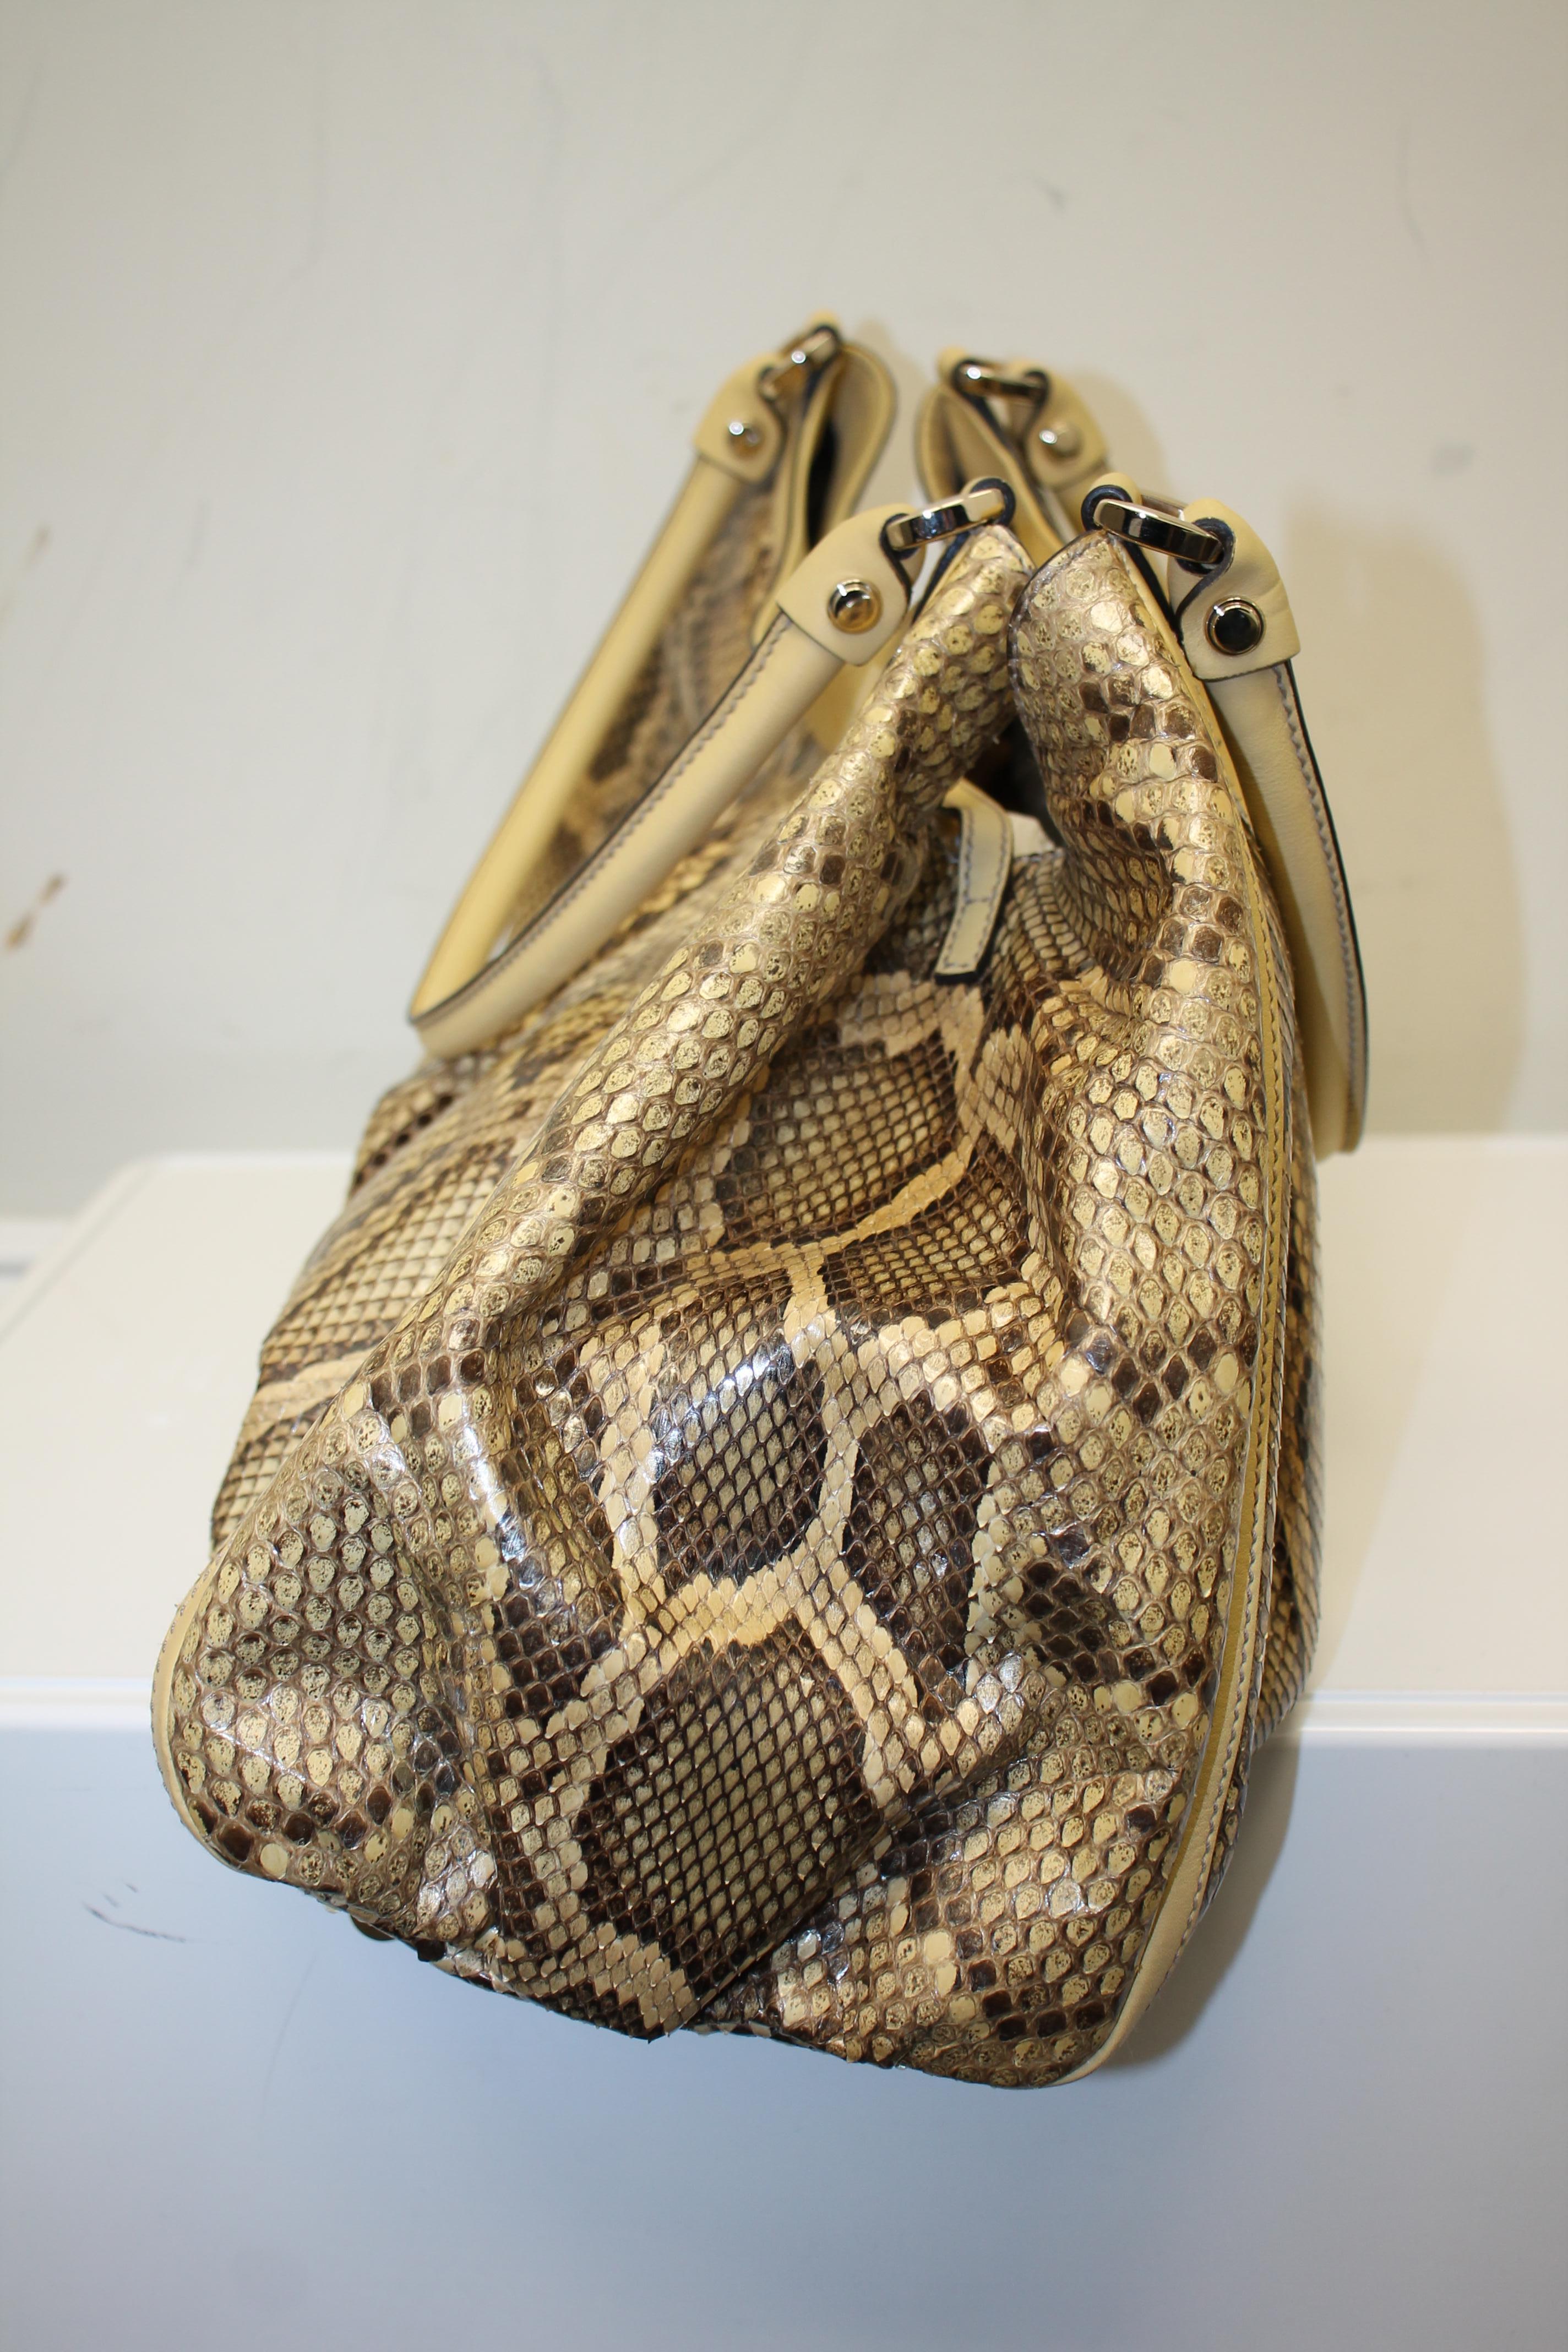 Tan and brown tone python. Silver-tone hardware. Beige leather trim. Clip lock closure at top. Dual leather top rolled handles. Protective feet at base. Lined interior. One interior opened phone pocket. One interior zippered pocket.